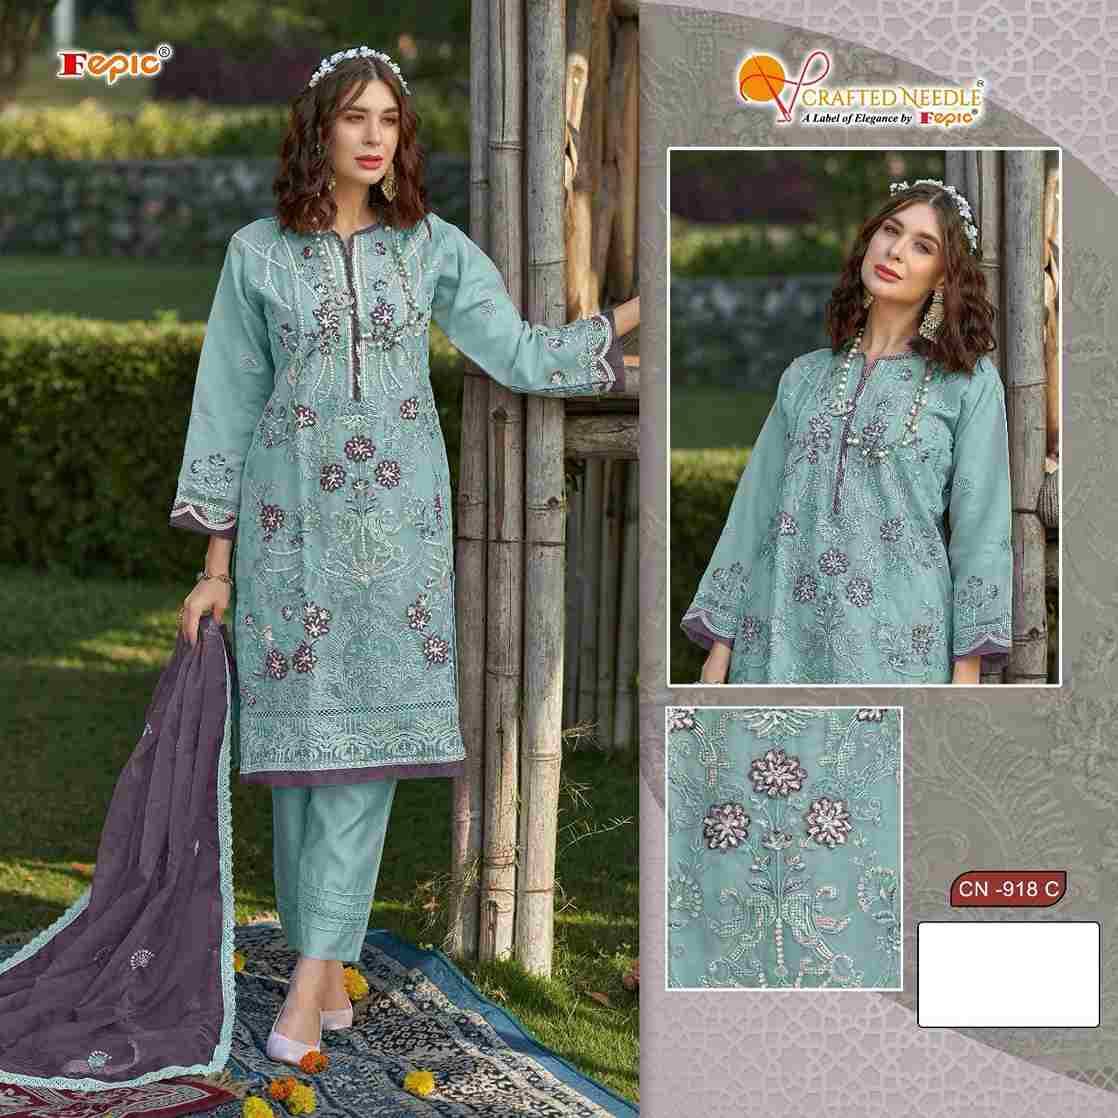 Fepic 918 Colours By Fepic 918-A To 918-C Series Beautiful Pakistani Suits Colorful Stylish Fancy Casual Wear & Ethnic Wear Organza Embroidered Dresses At Wholesale Price